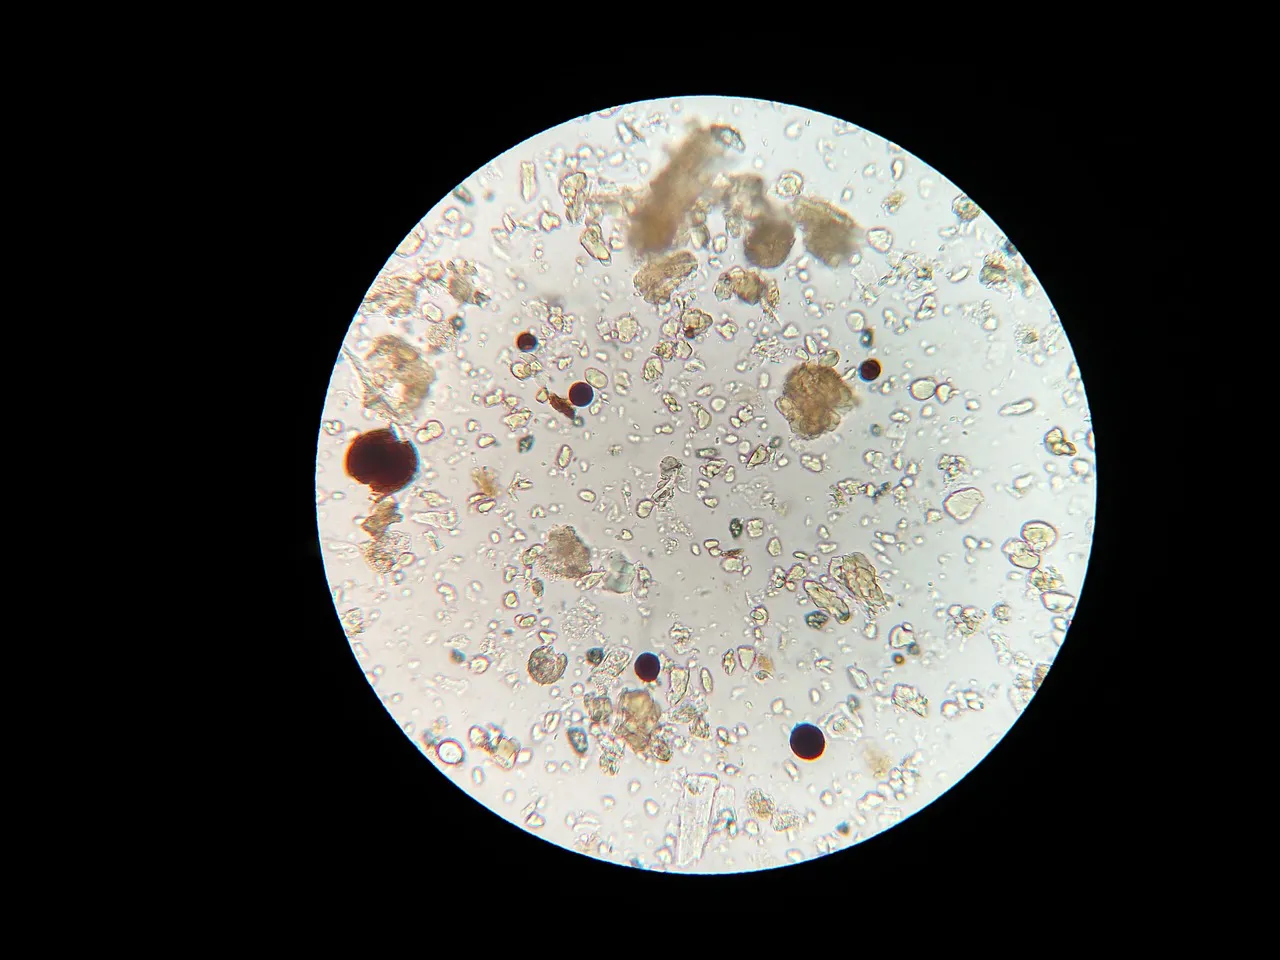 Close-up view of soil microbes as seen under a microscope.